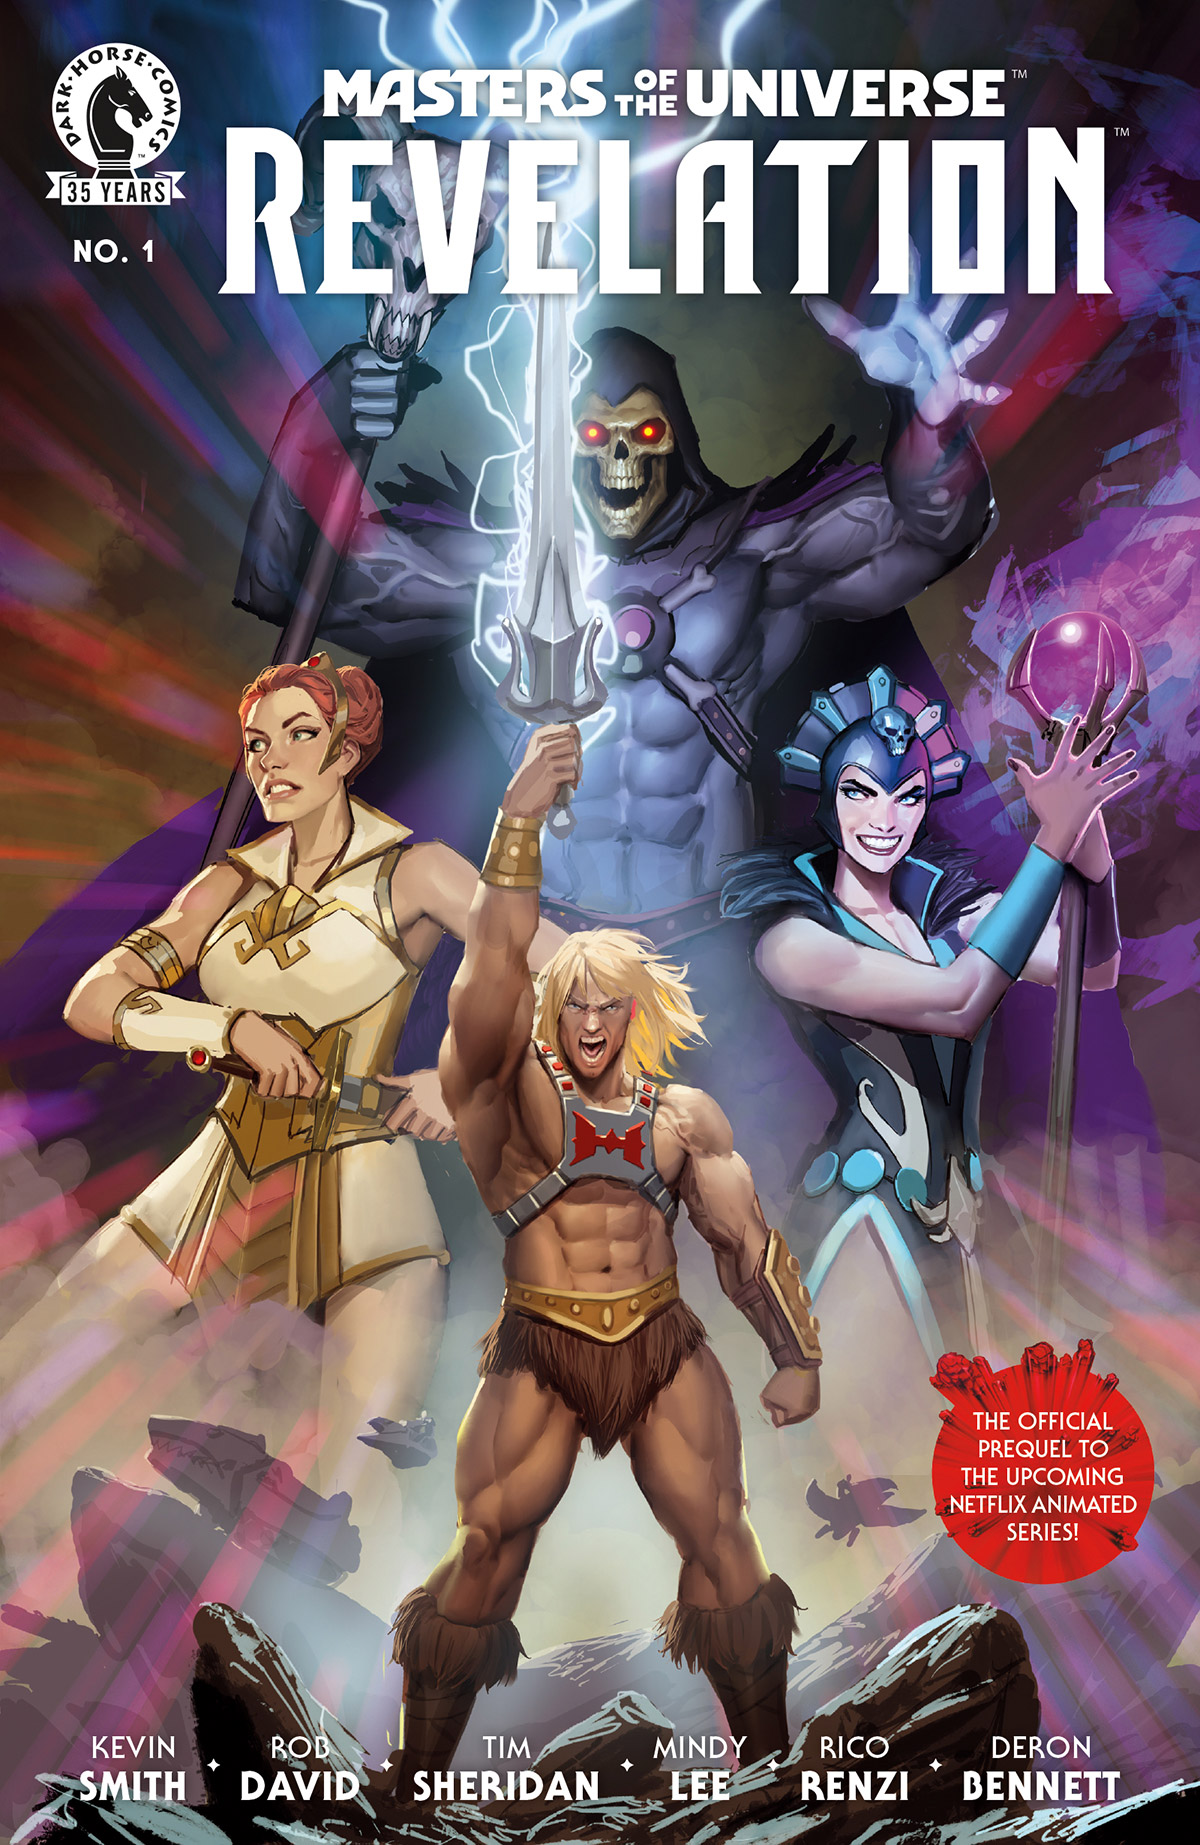 Mattel and Dark Horse Comics to Release 'Masters of the Universe